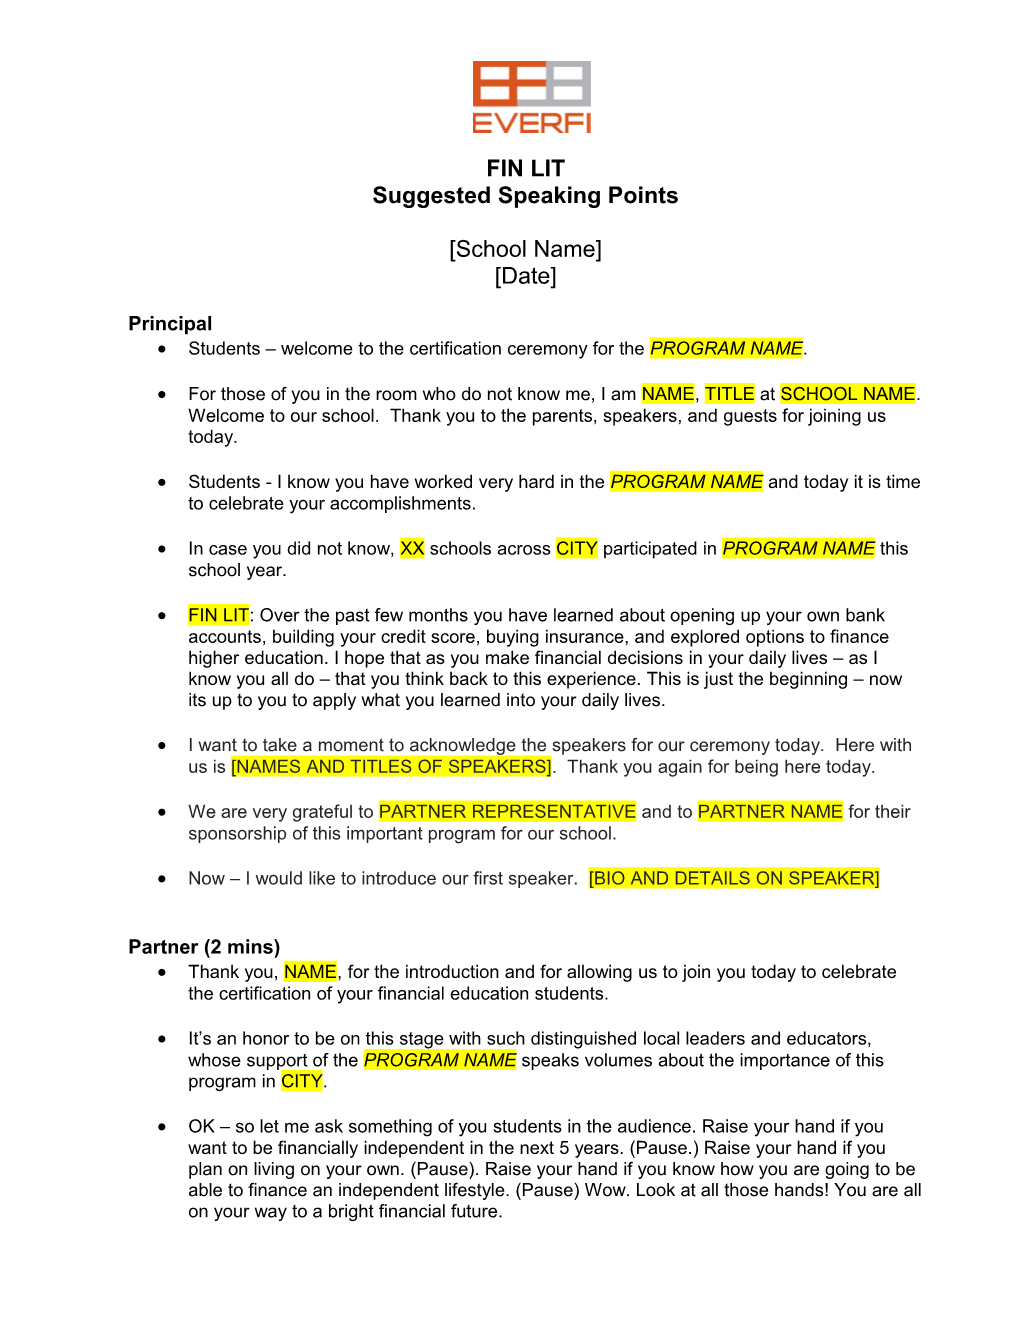 Suggested Speaking Points